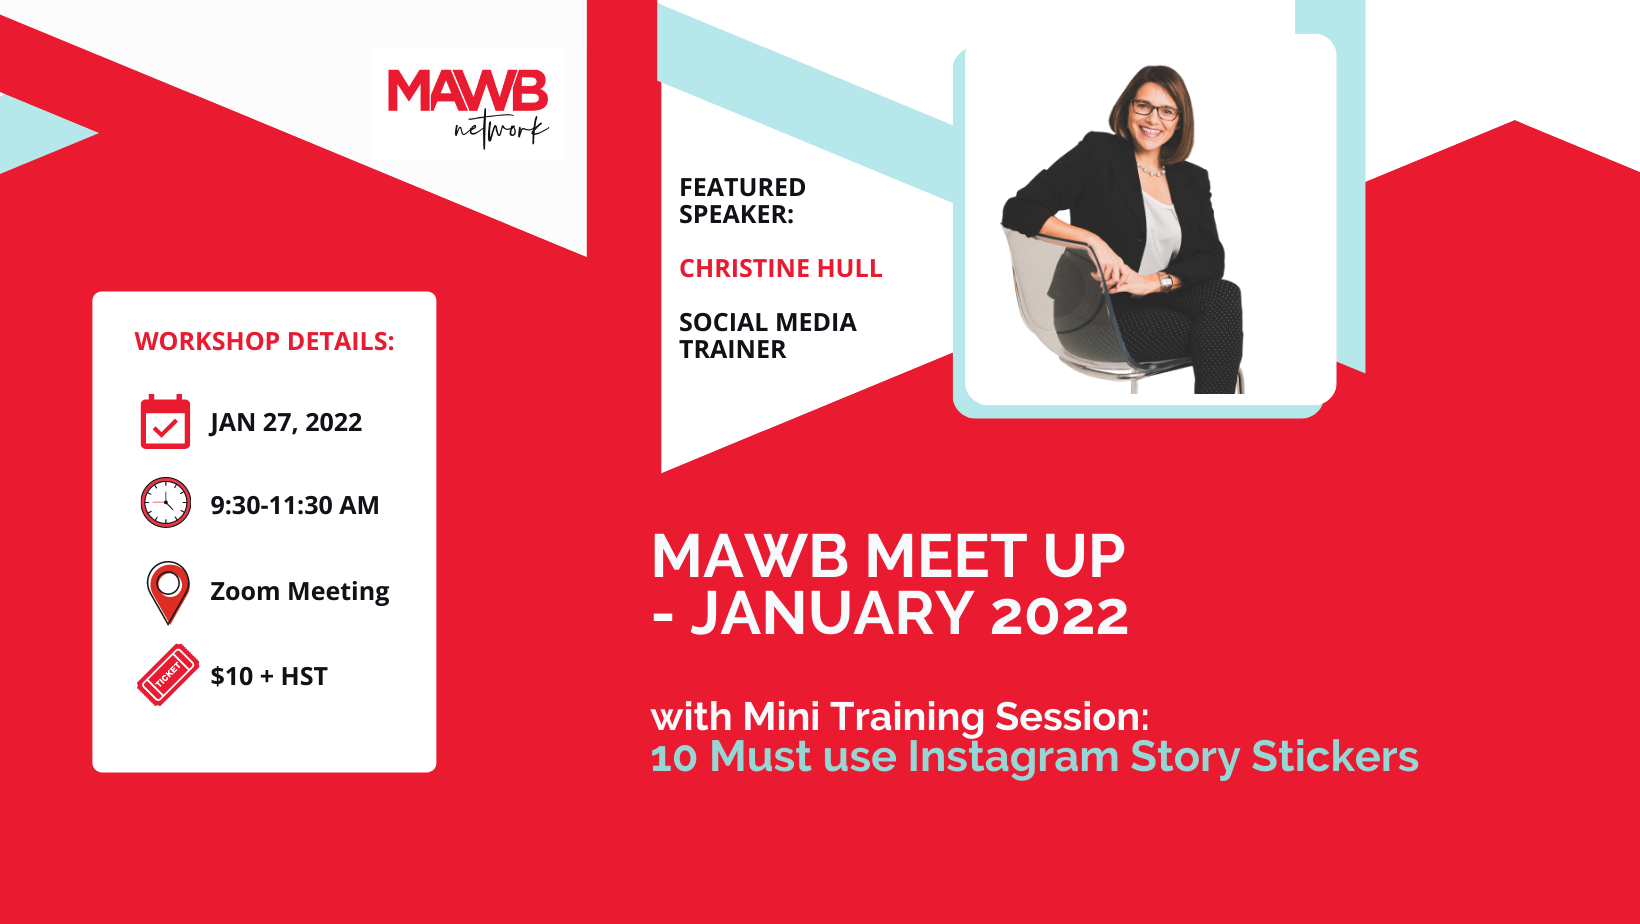 MAWB Meet UP - january 2022 with Mini Training Session: 10 Must use Instagram Story Stickers